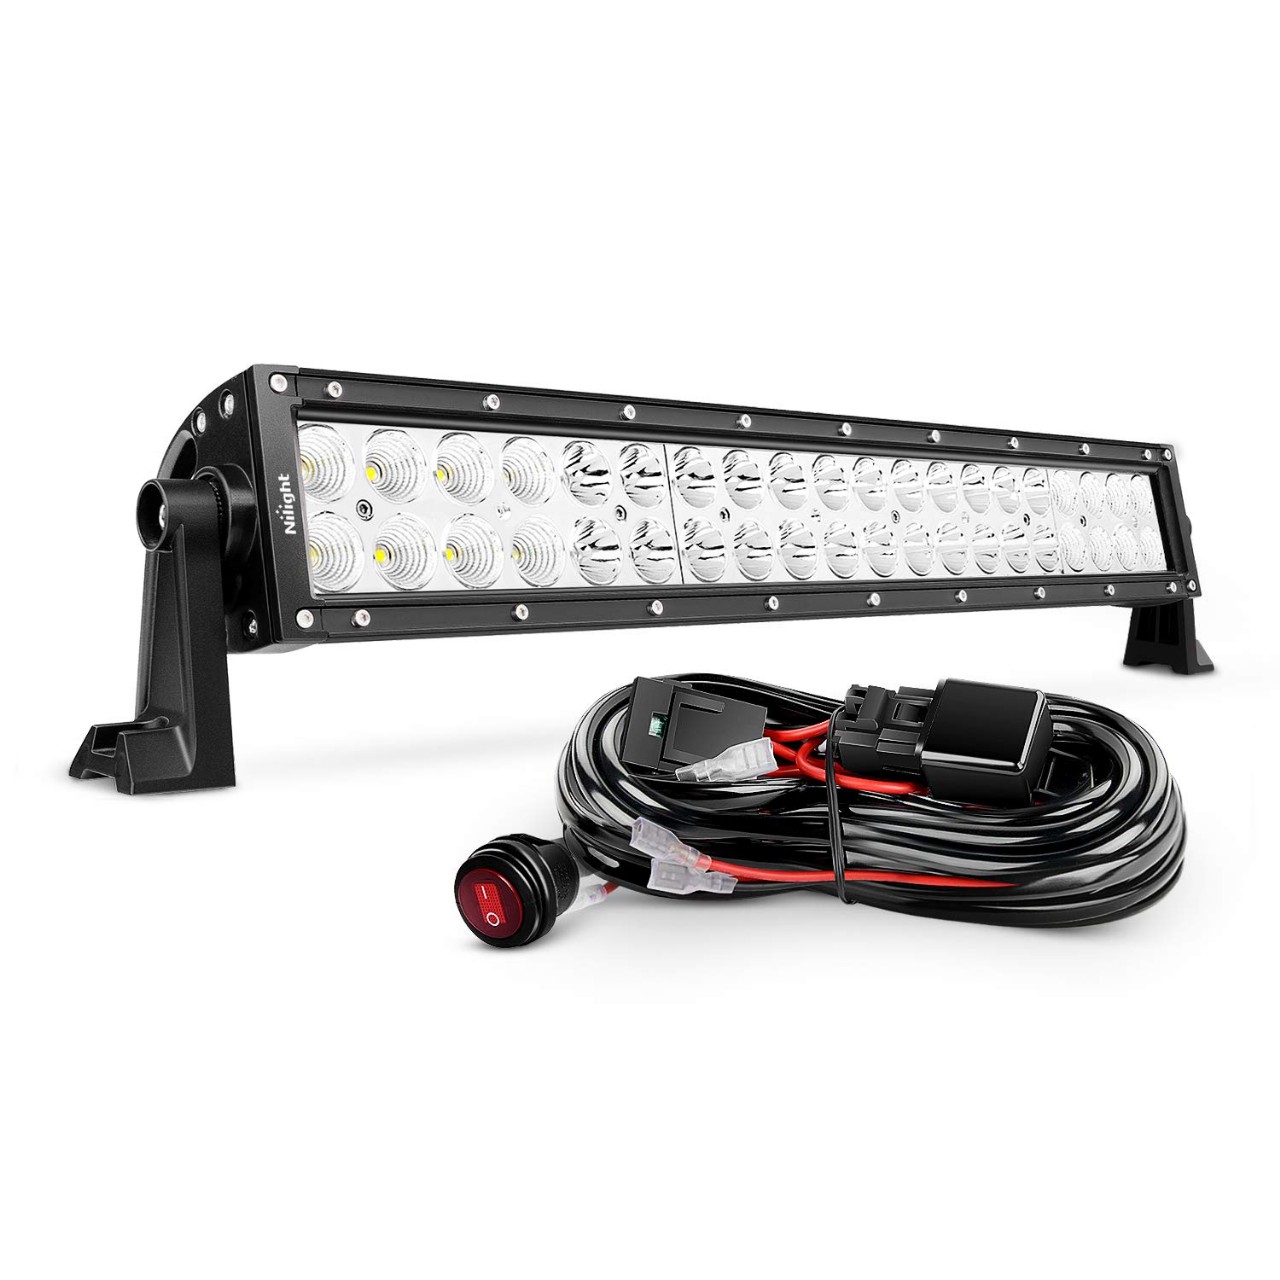 22Inch 120W Spot Flood Combo Bar Led Off Road Lights with 16AWG Wiring Harness Kit, 2 Years Warranty